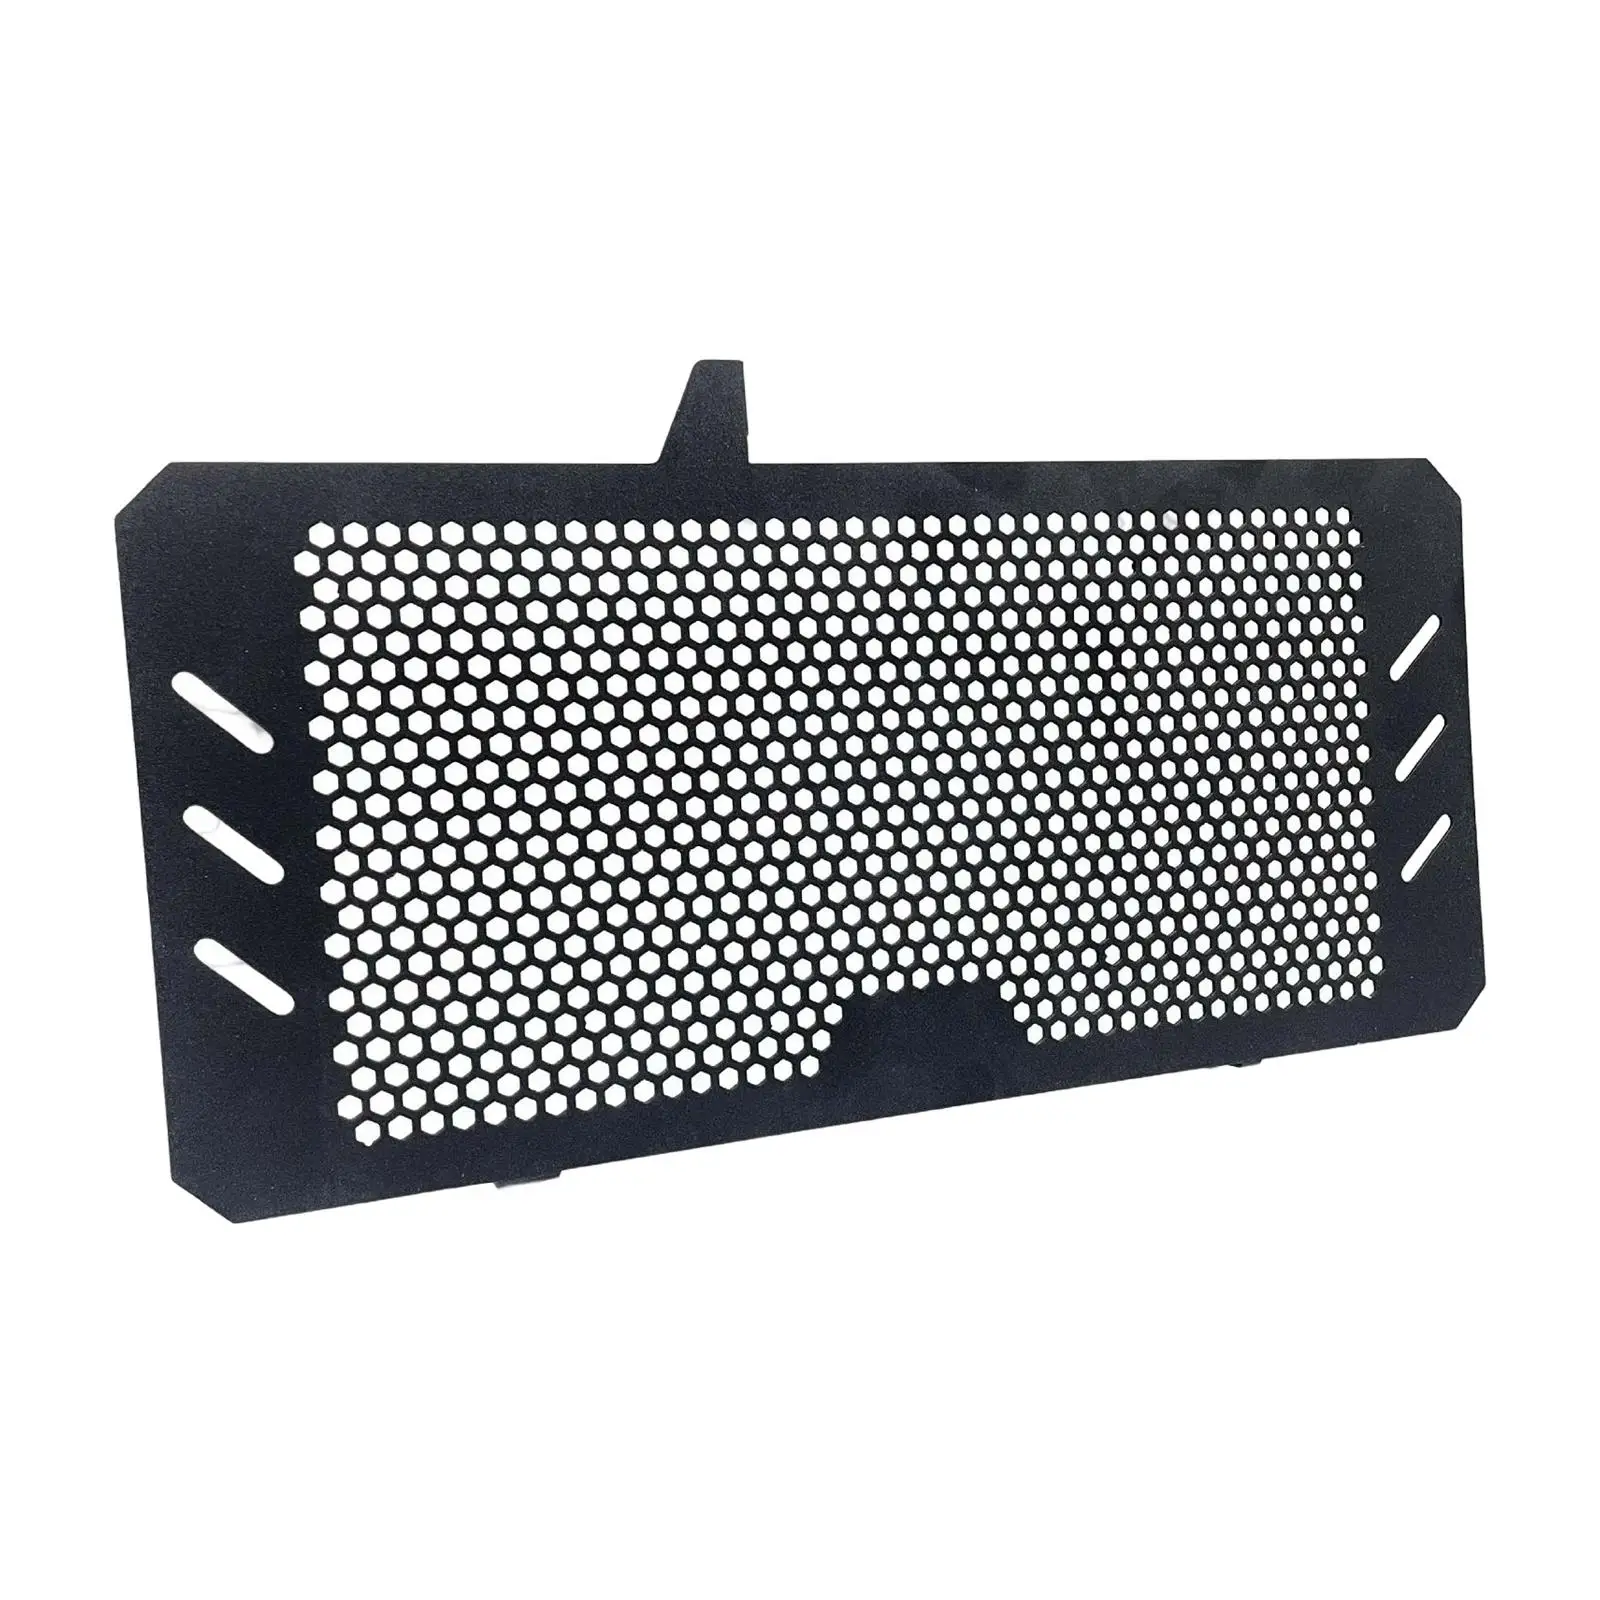 Motorbike Motorcycle Grille Guard for NC750 S / x